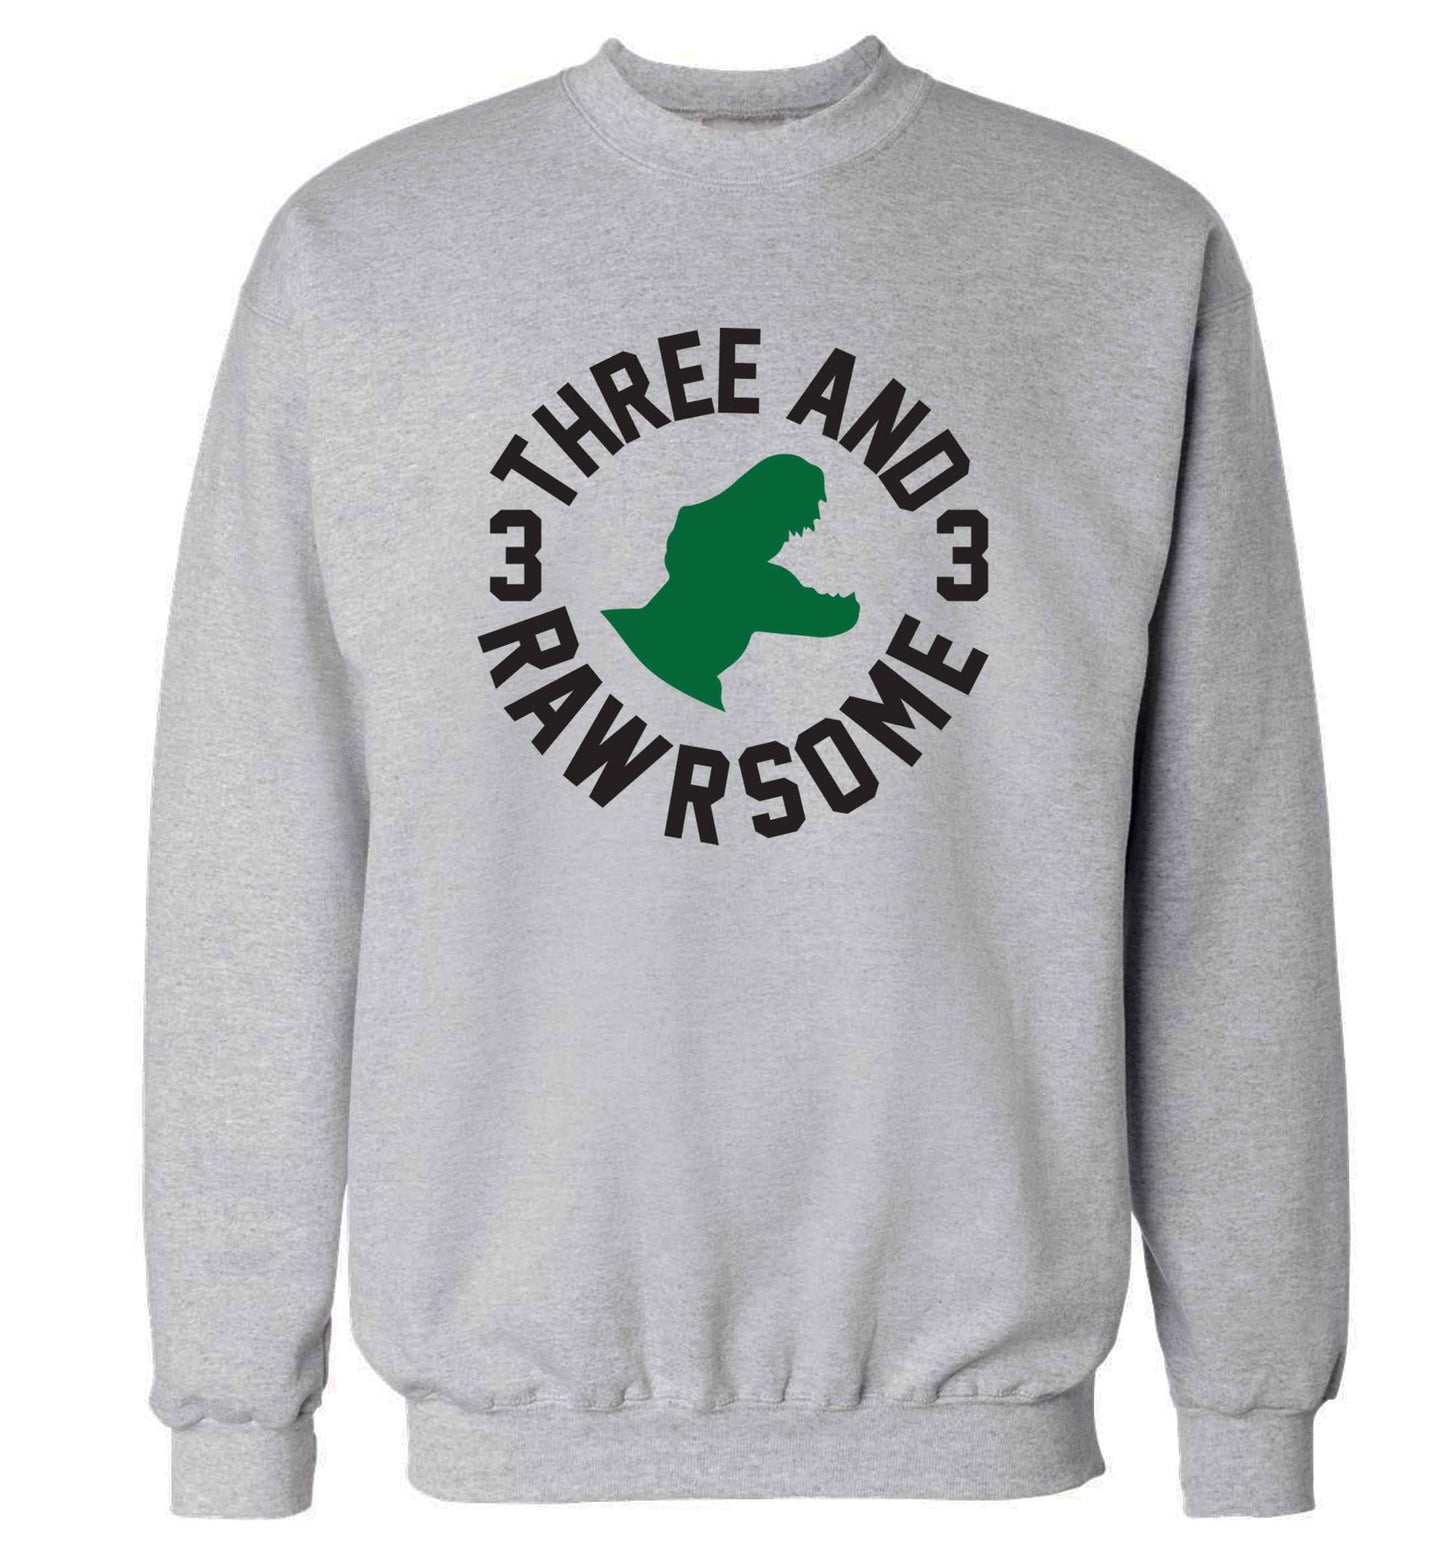 Three and rawrsome adult's unisex grey sweater 2XL